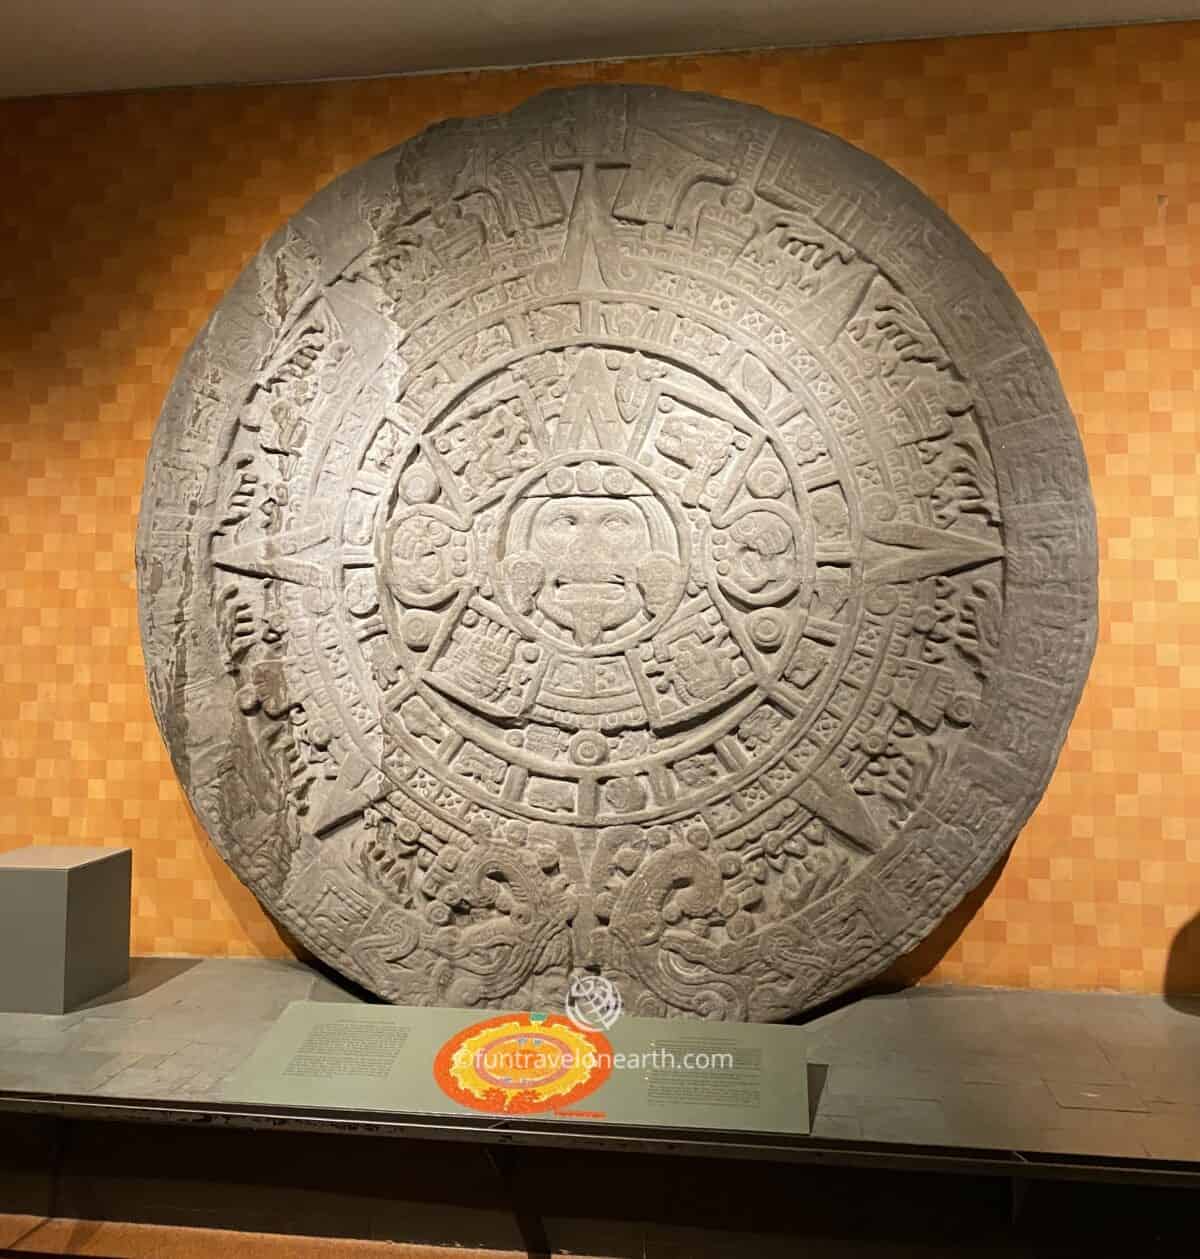 Aztec Stone of the Sun, American Museum of Natural History, New York